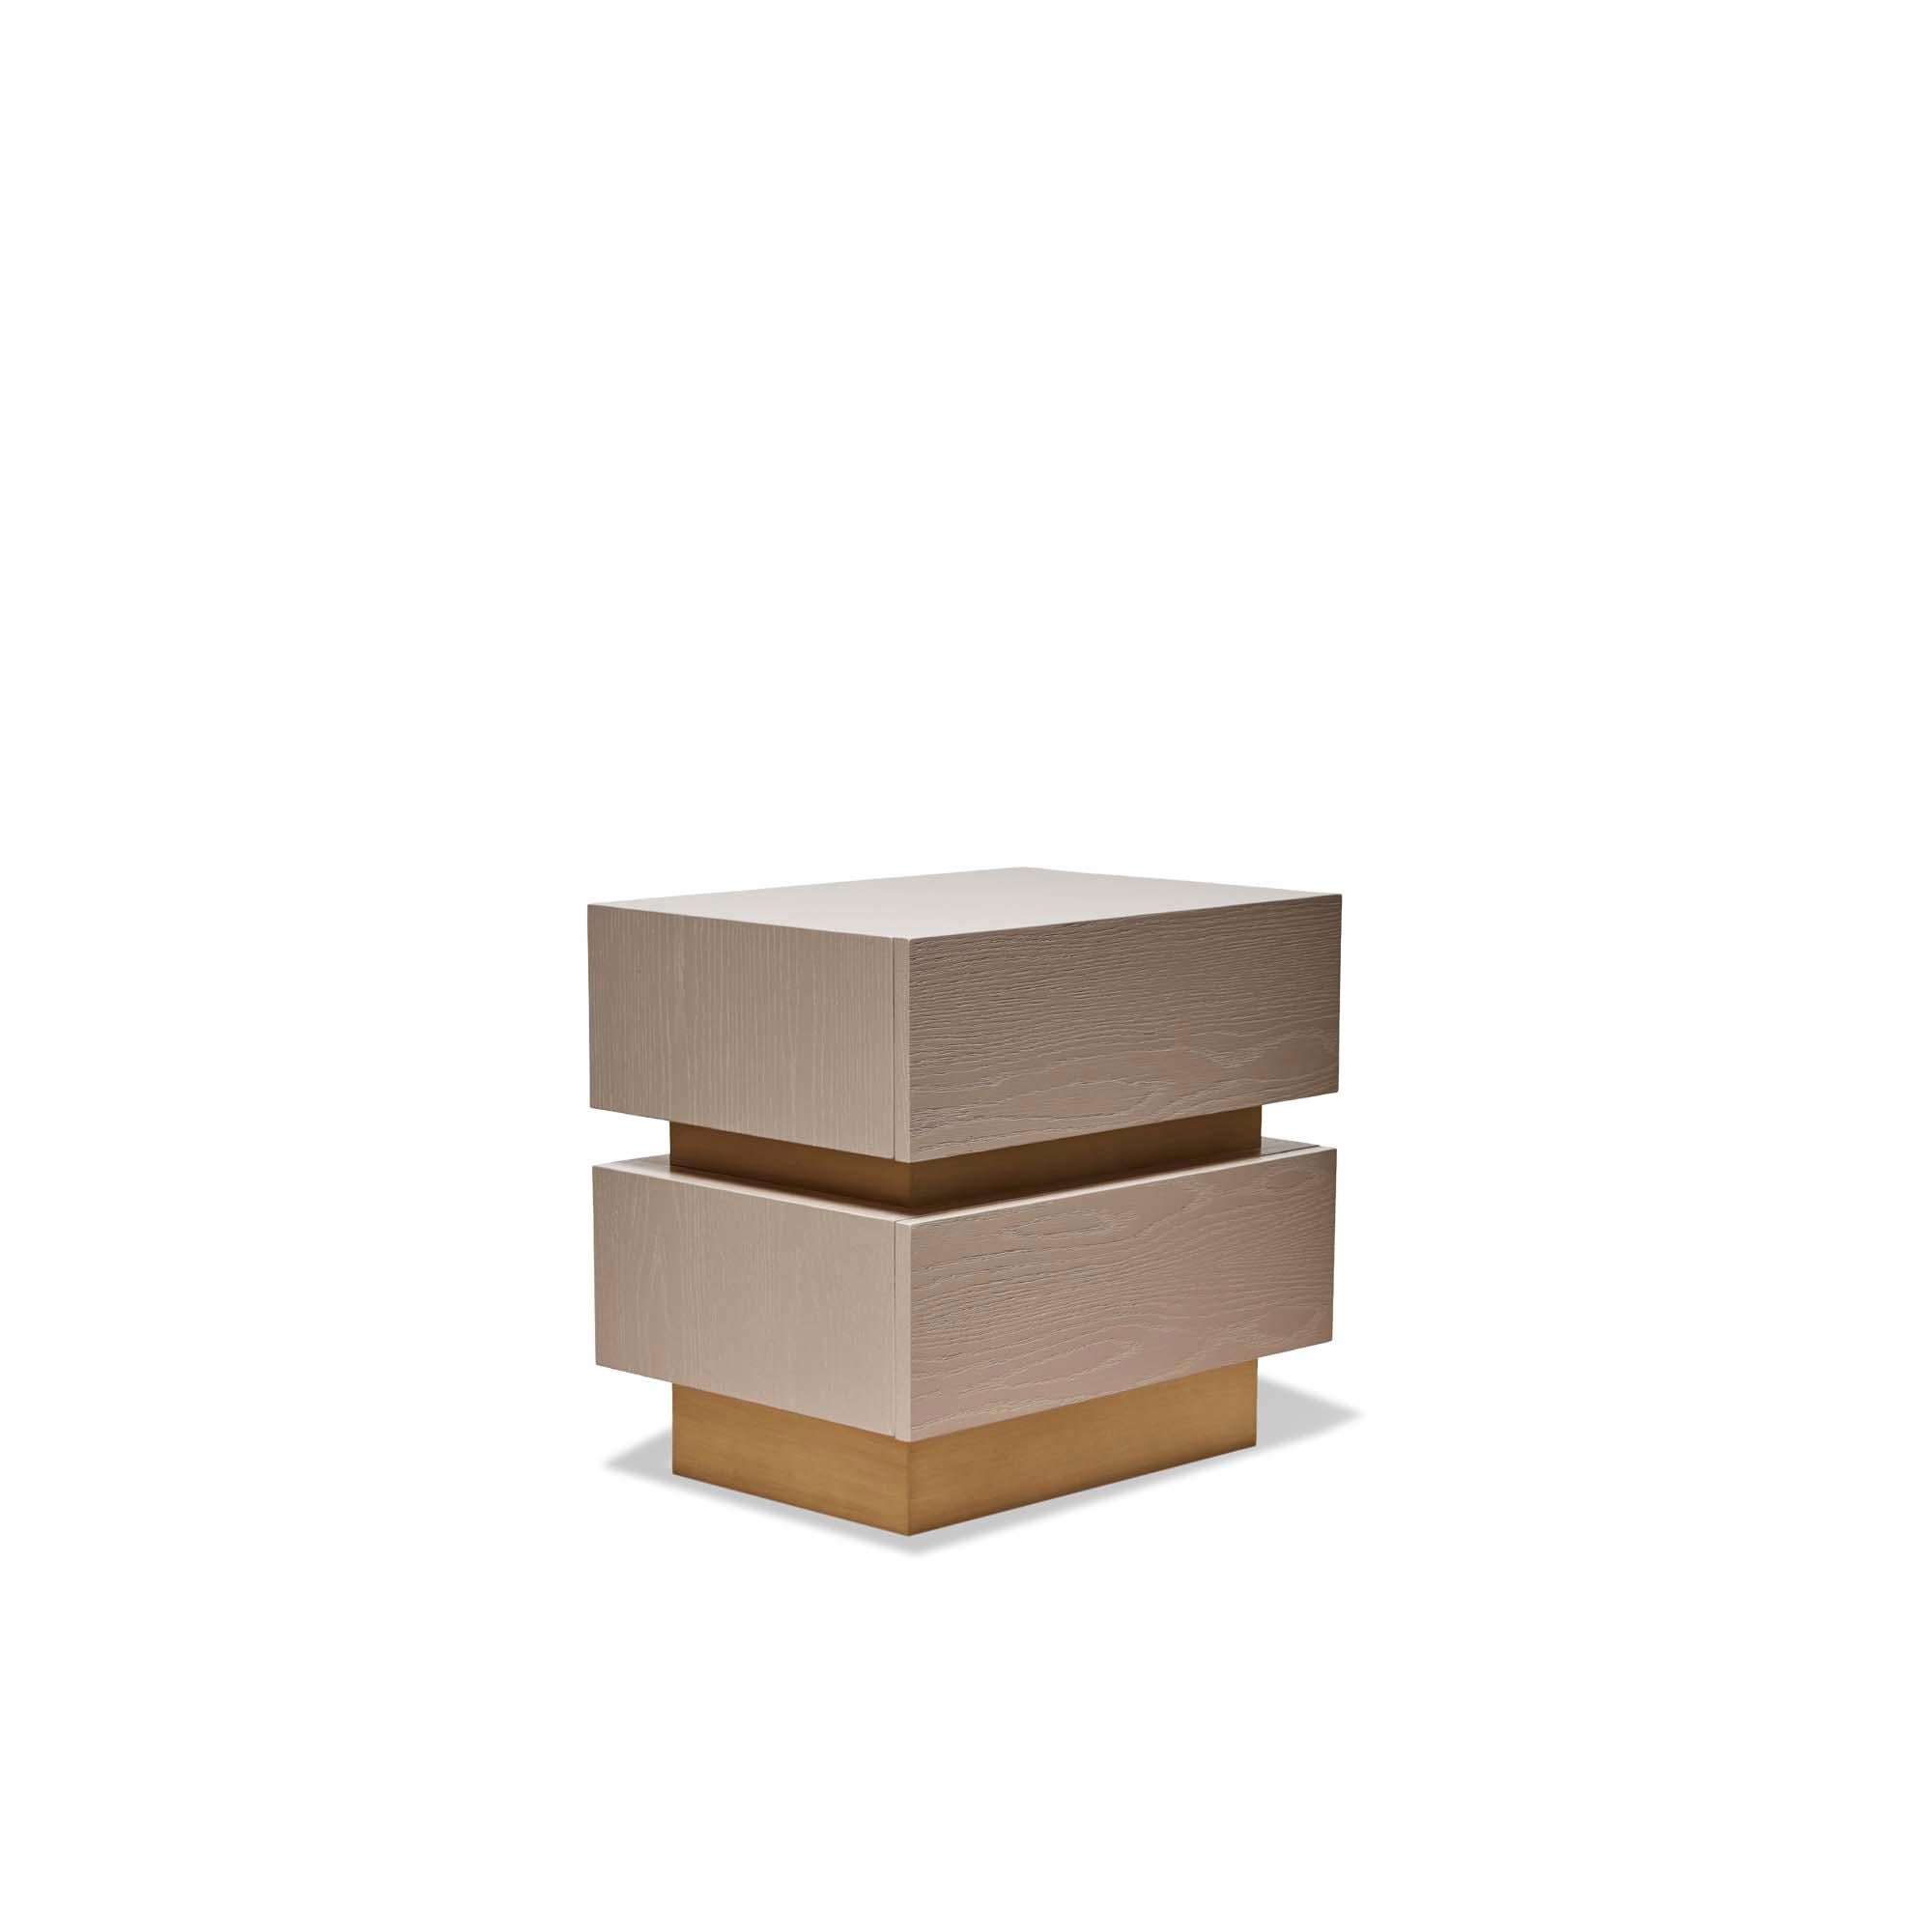 The Stacked Box Nightstand with Metal Inset is a bedside table with two drawers that is available in either American walnut, or white oak and features a metal inset detail between the drawers. Available in two sizes. Available in all wood.

The